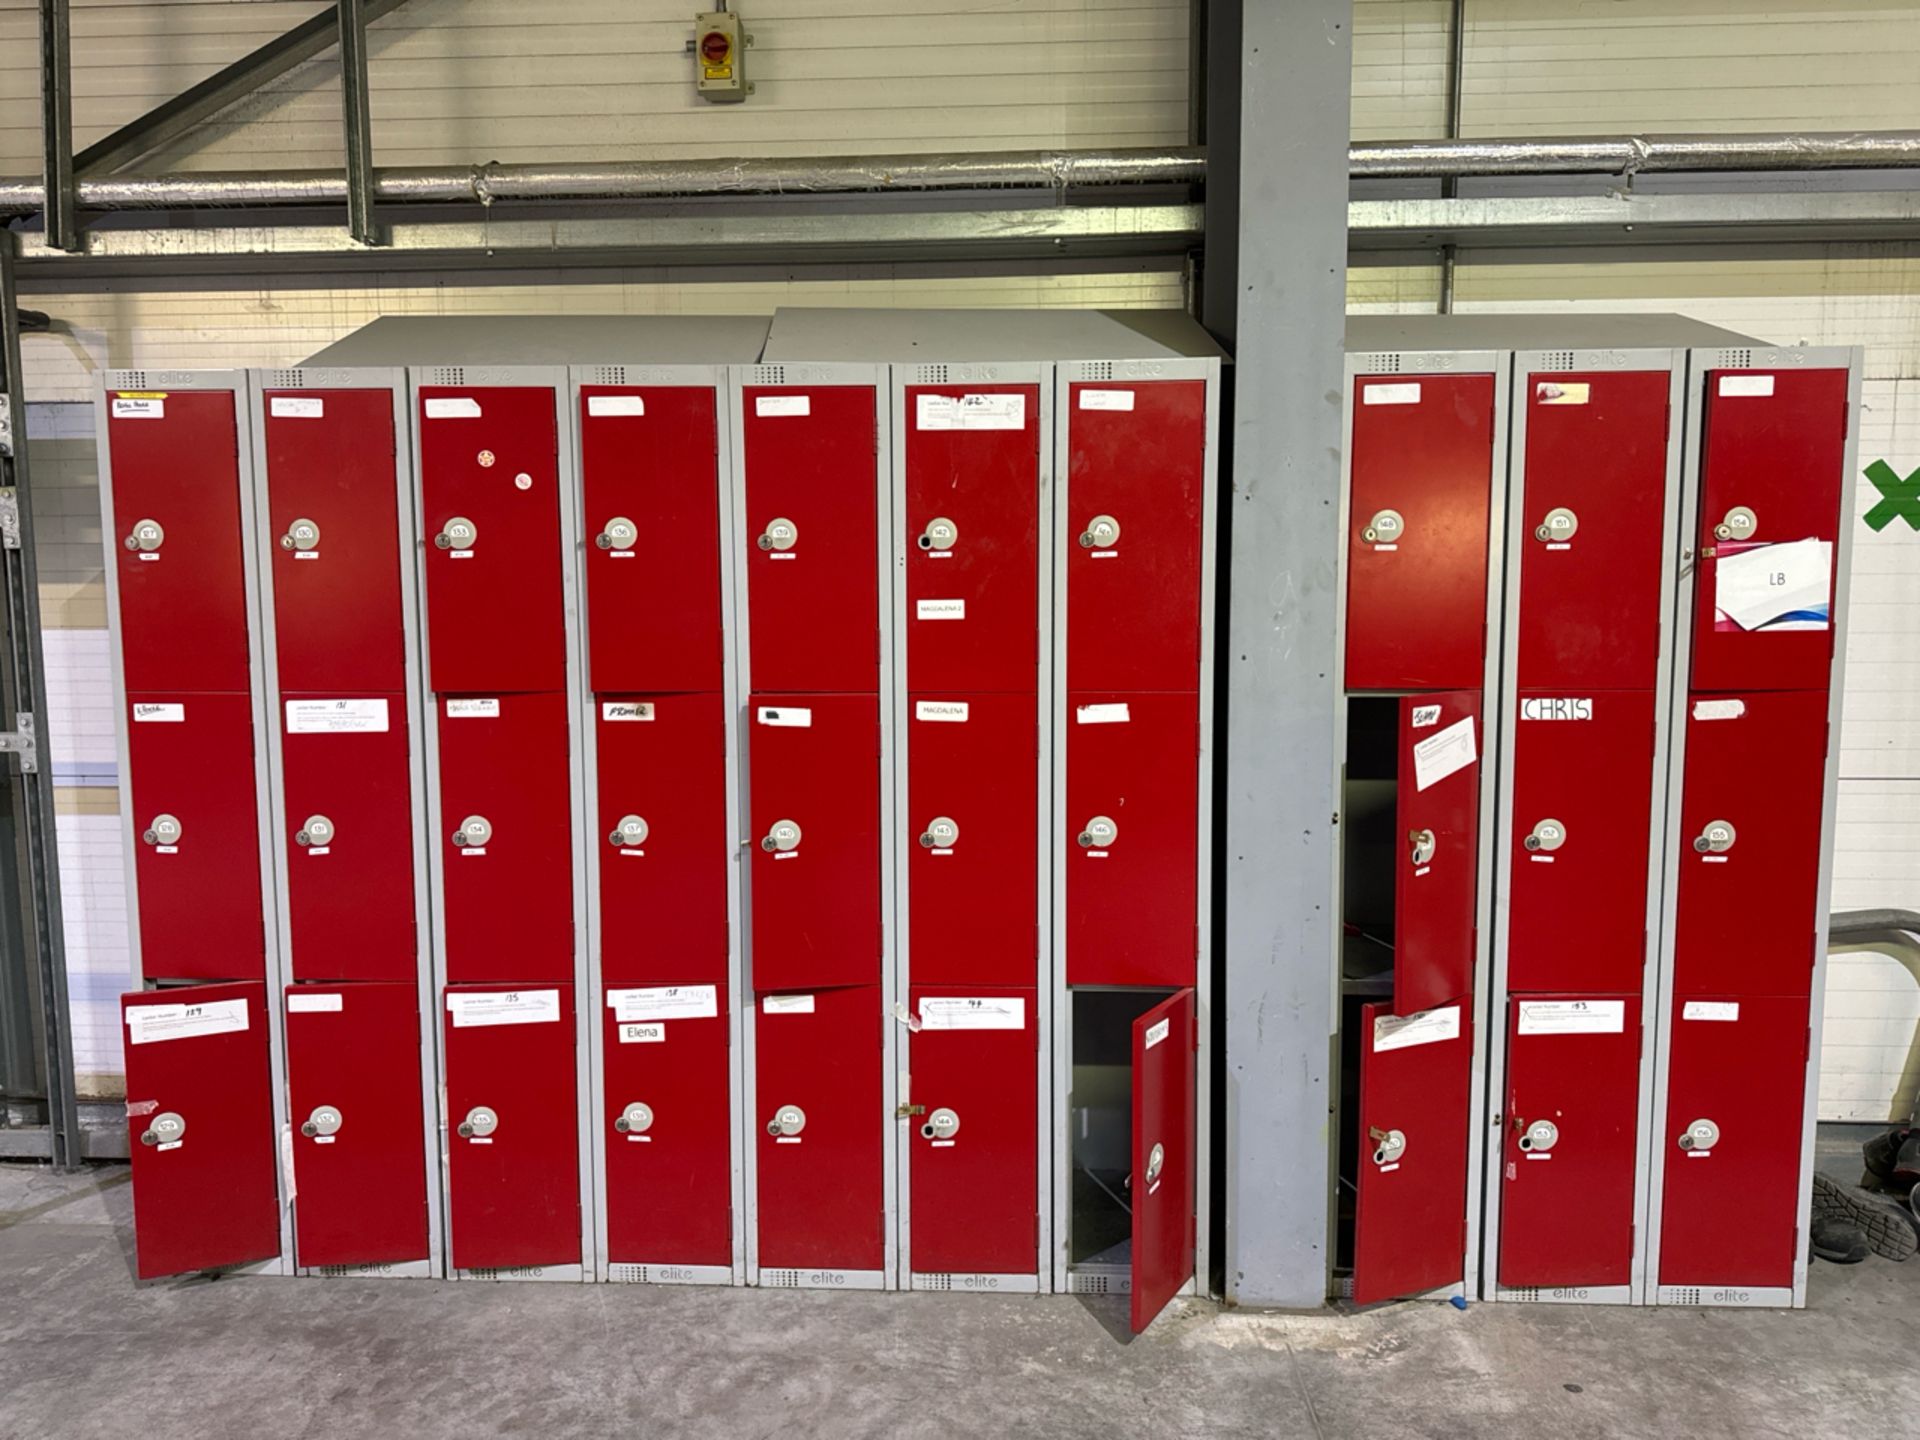 A Run Of 10 Sets Of Lockers